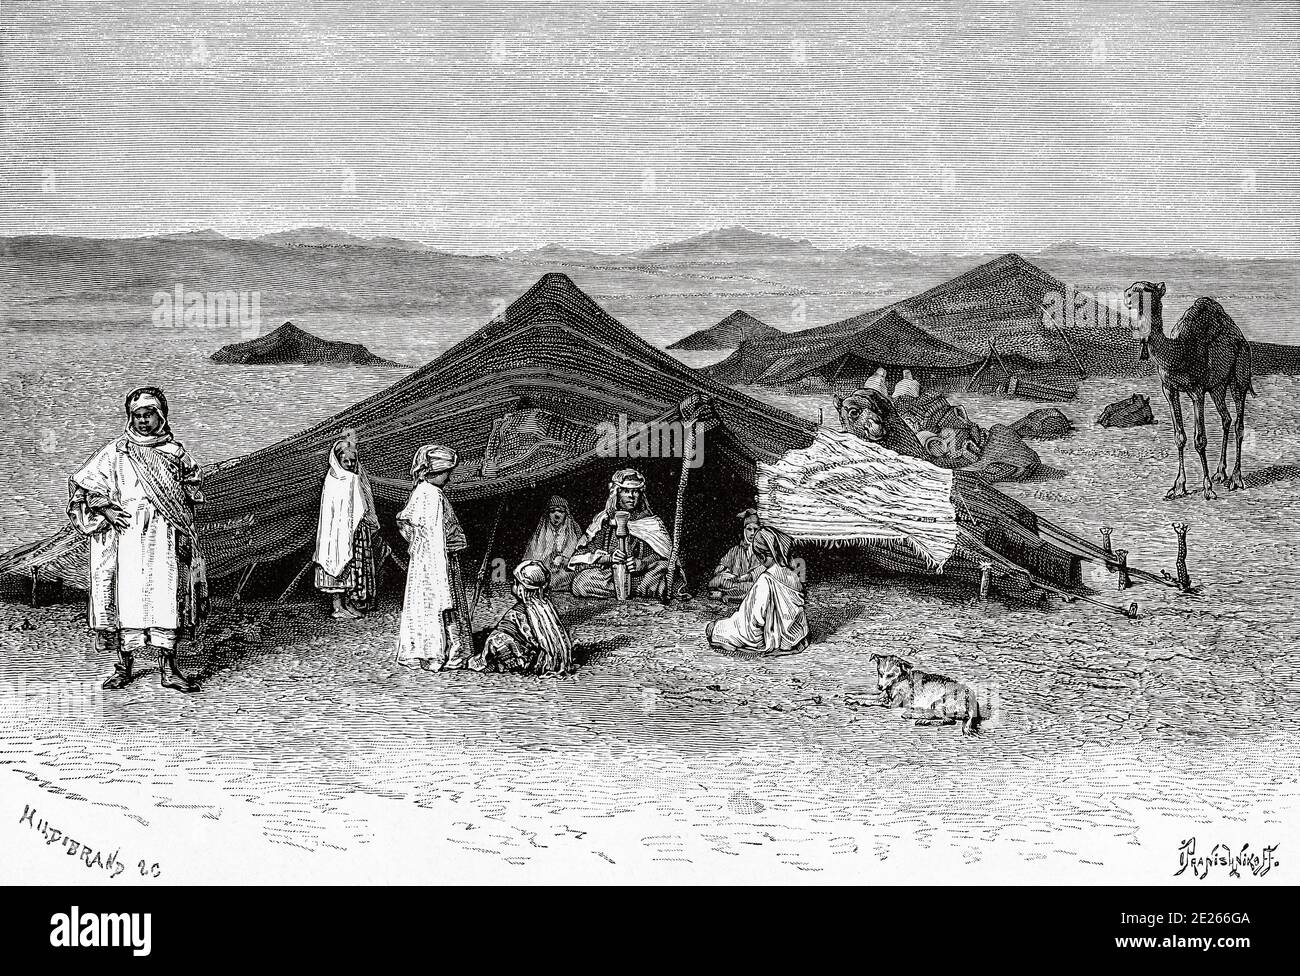 Nomad encampment, Sahara. North Africa. Old engraving illustration from the book Nueva Geografia Universal by Eliseo Reclus 1889 Stock Photo